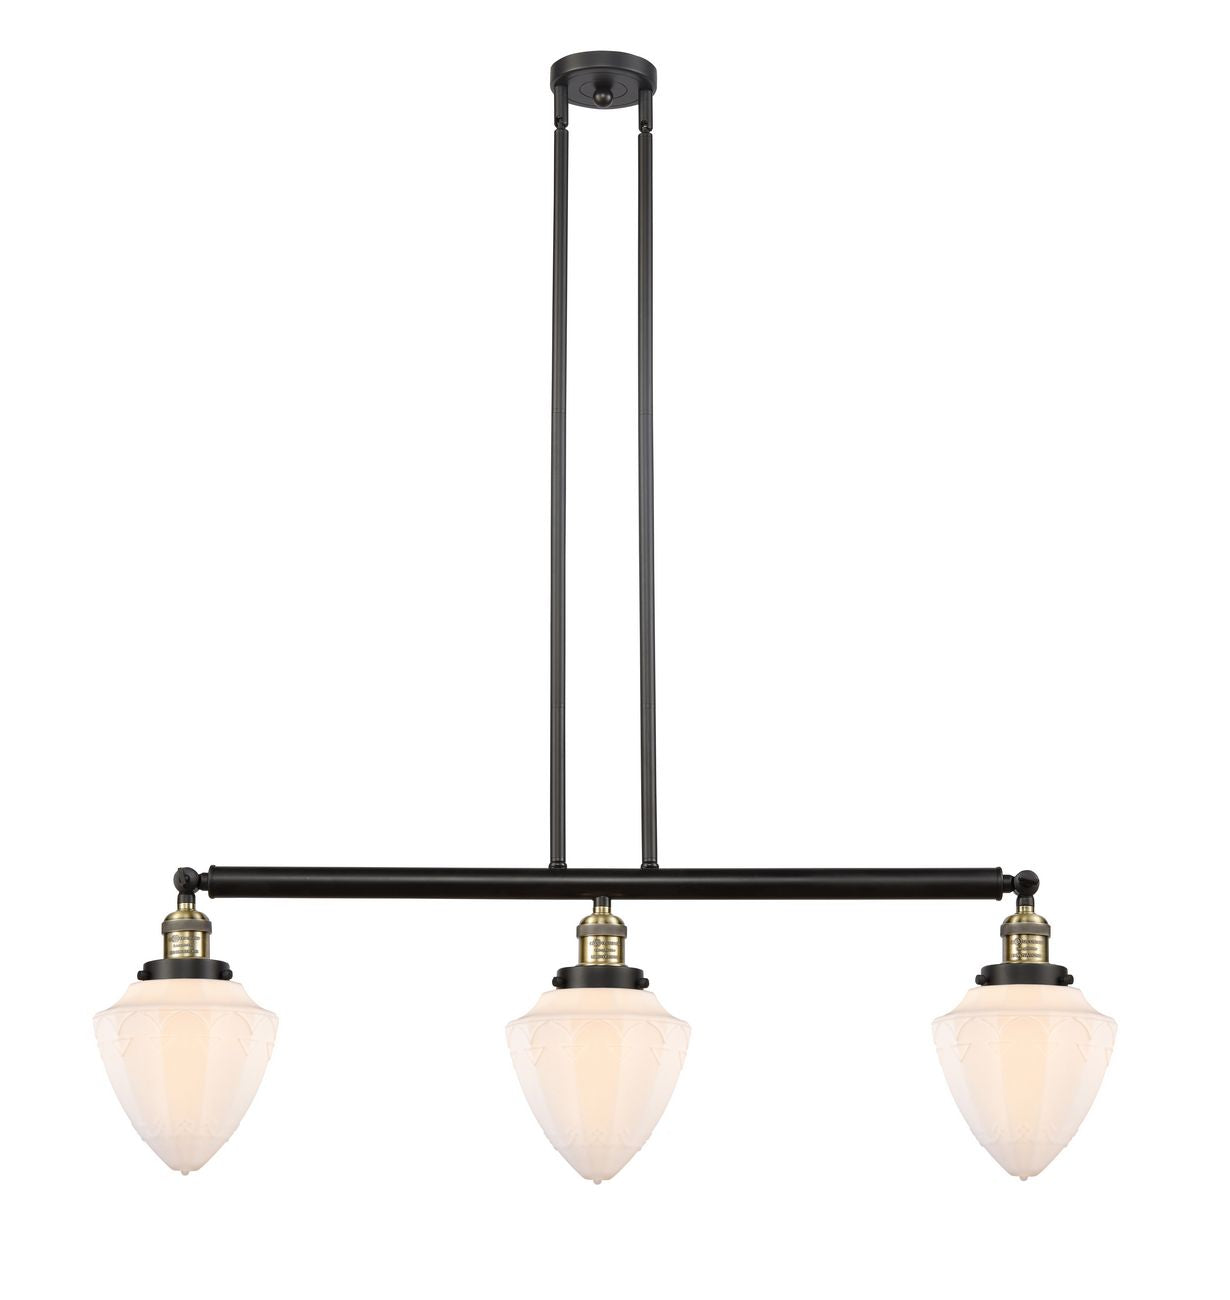 213-BAB-G661-7 3-Light 38" Black Antique Brass Island Light - Matte White Cased Small Bullet Glass - LED Bulb - Dimmensions: 38 x 7 x 15.25<br>Minimum Height : 24.25<br>Maximum Height : 48.25 - Sloped Ceiling Compatible: Yes